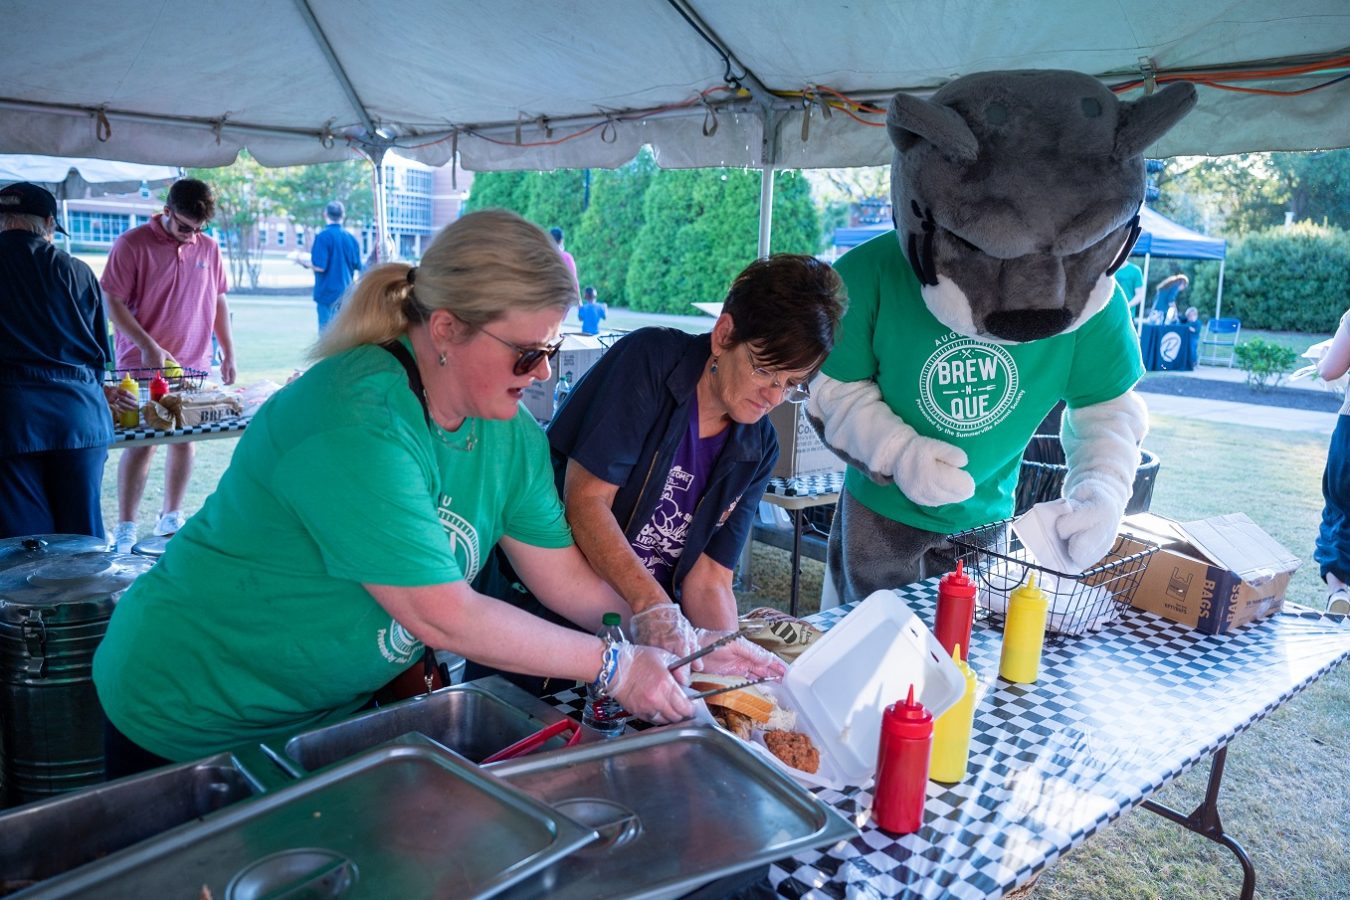 Augustus, Augusta University's mascot, helping hand out food